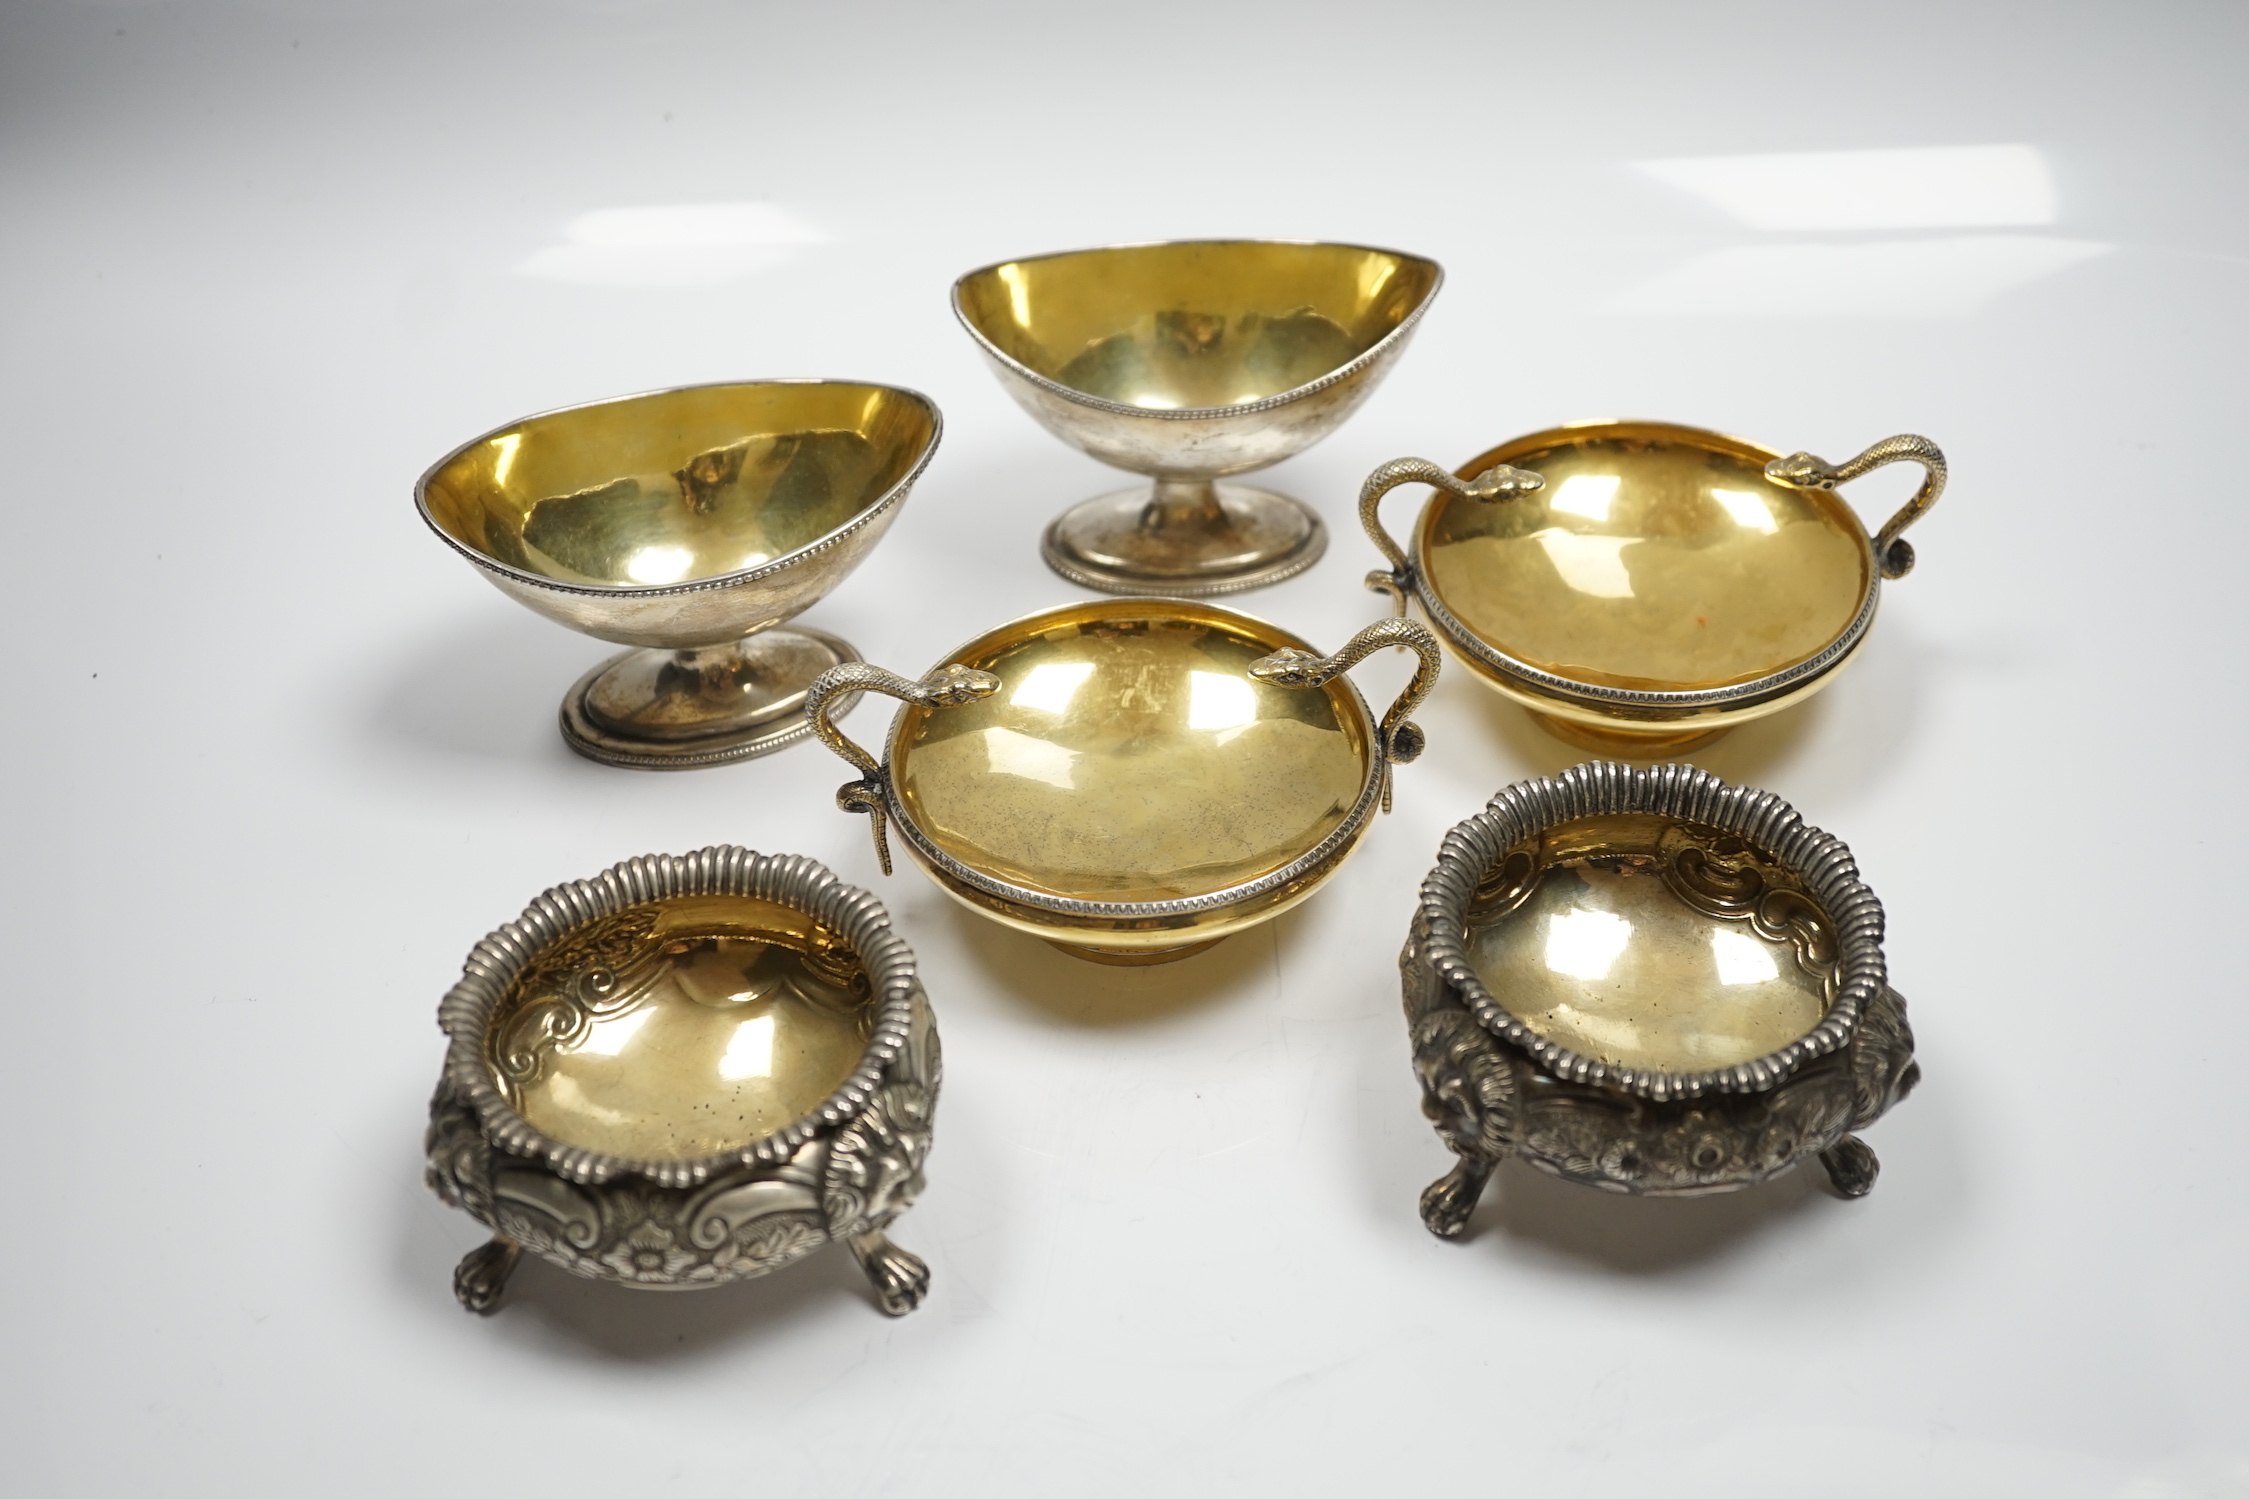 A pair of George V silver gilt shallow pedestal salts, with twin serpent handles, William Hutton & Sons, Ltd, Sheffield, 1928, width 11.8cm over handles, together with two matched pairs of Georgian silver salts, 20.3oz.